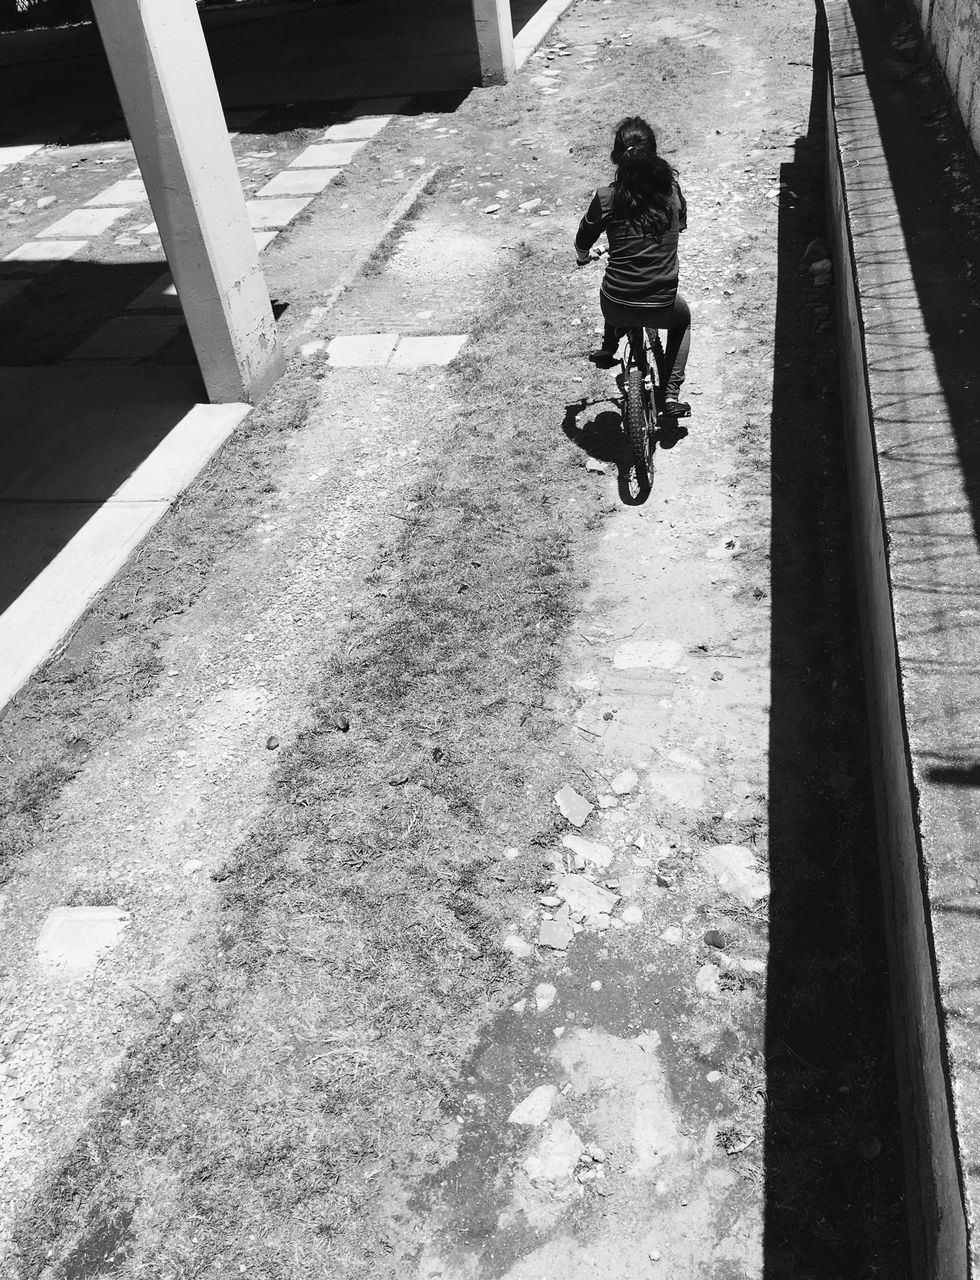 HIGH ANGLE VIEW OF MAN RIDING BICYCLE ON COBBLESTONE